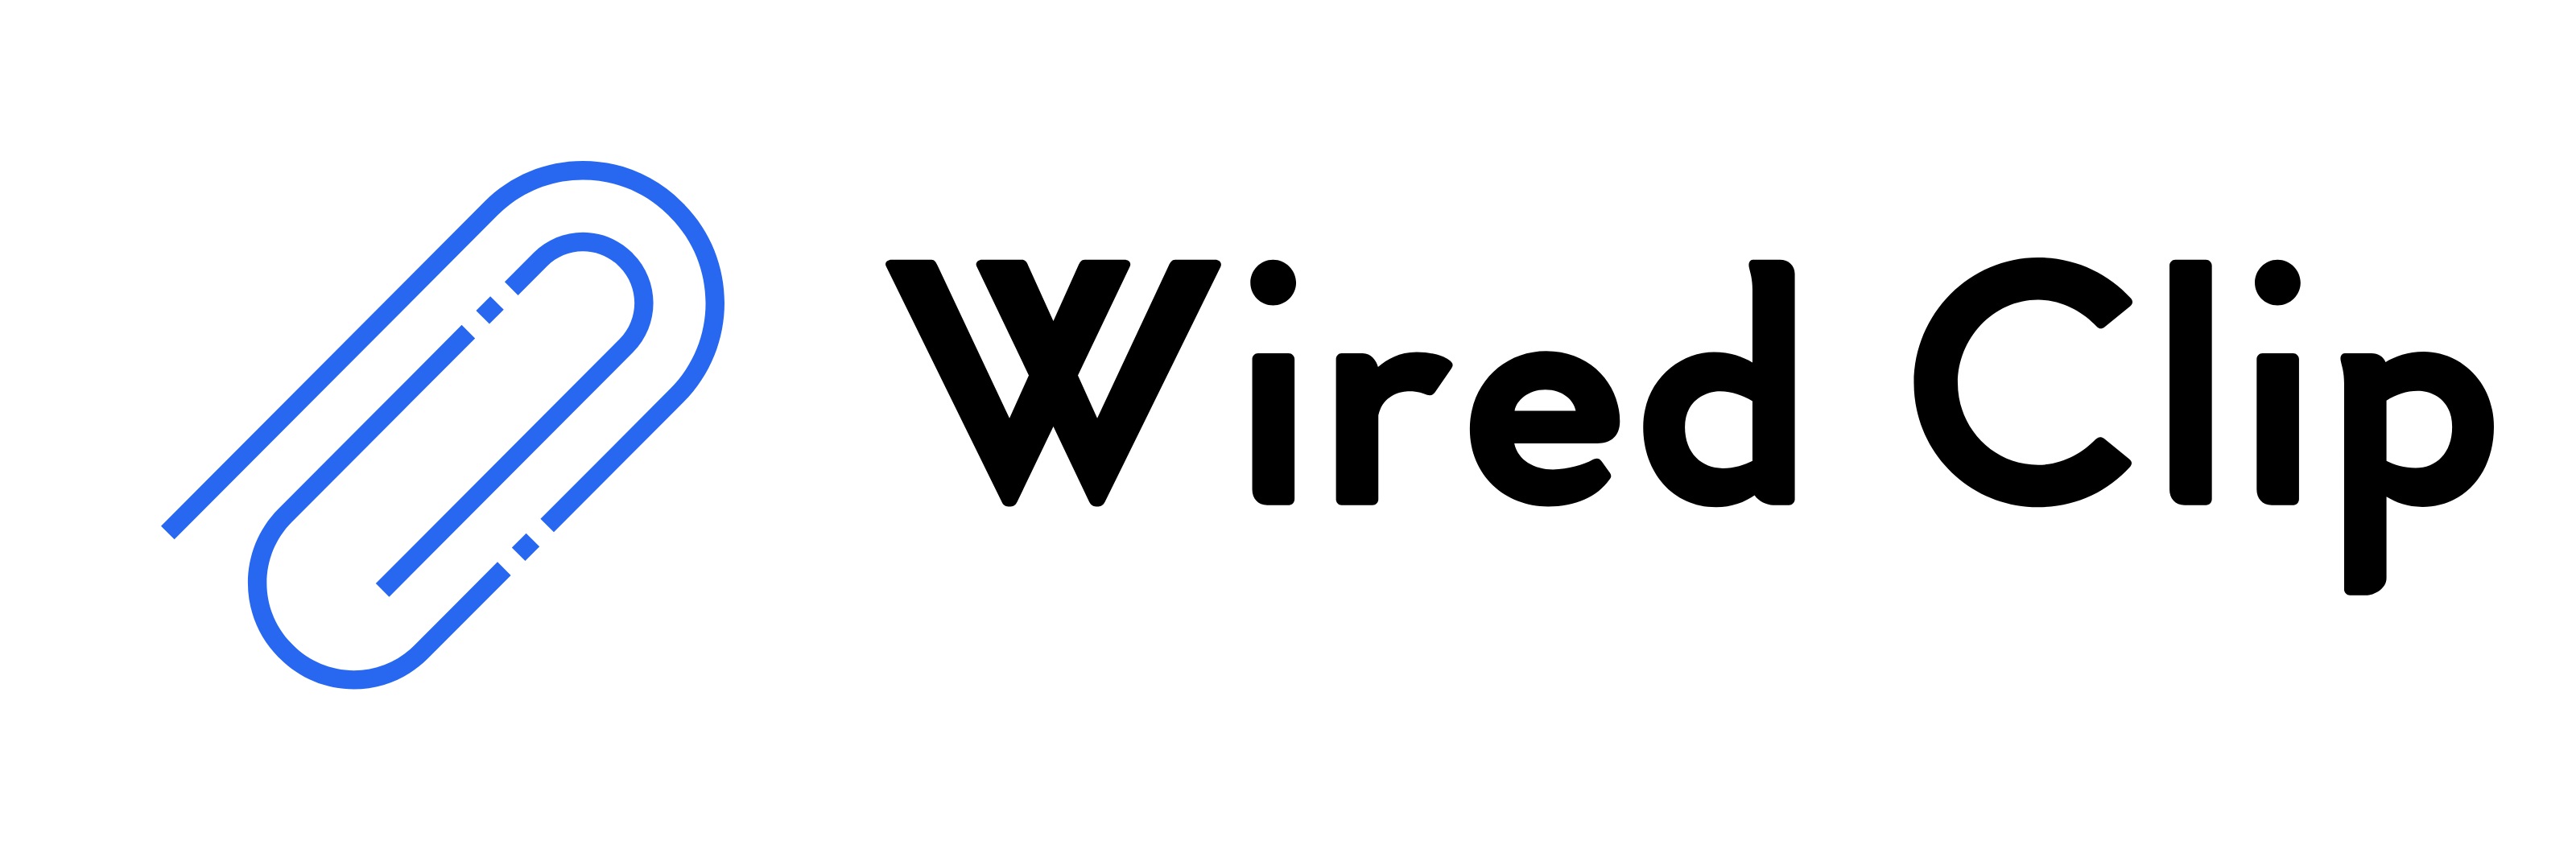 Wired Clip